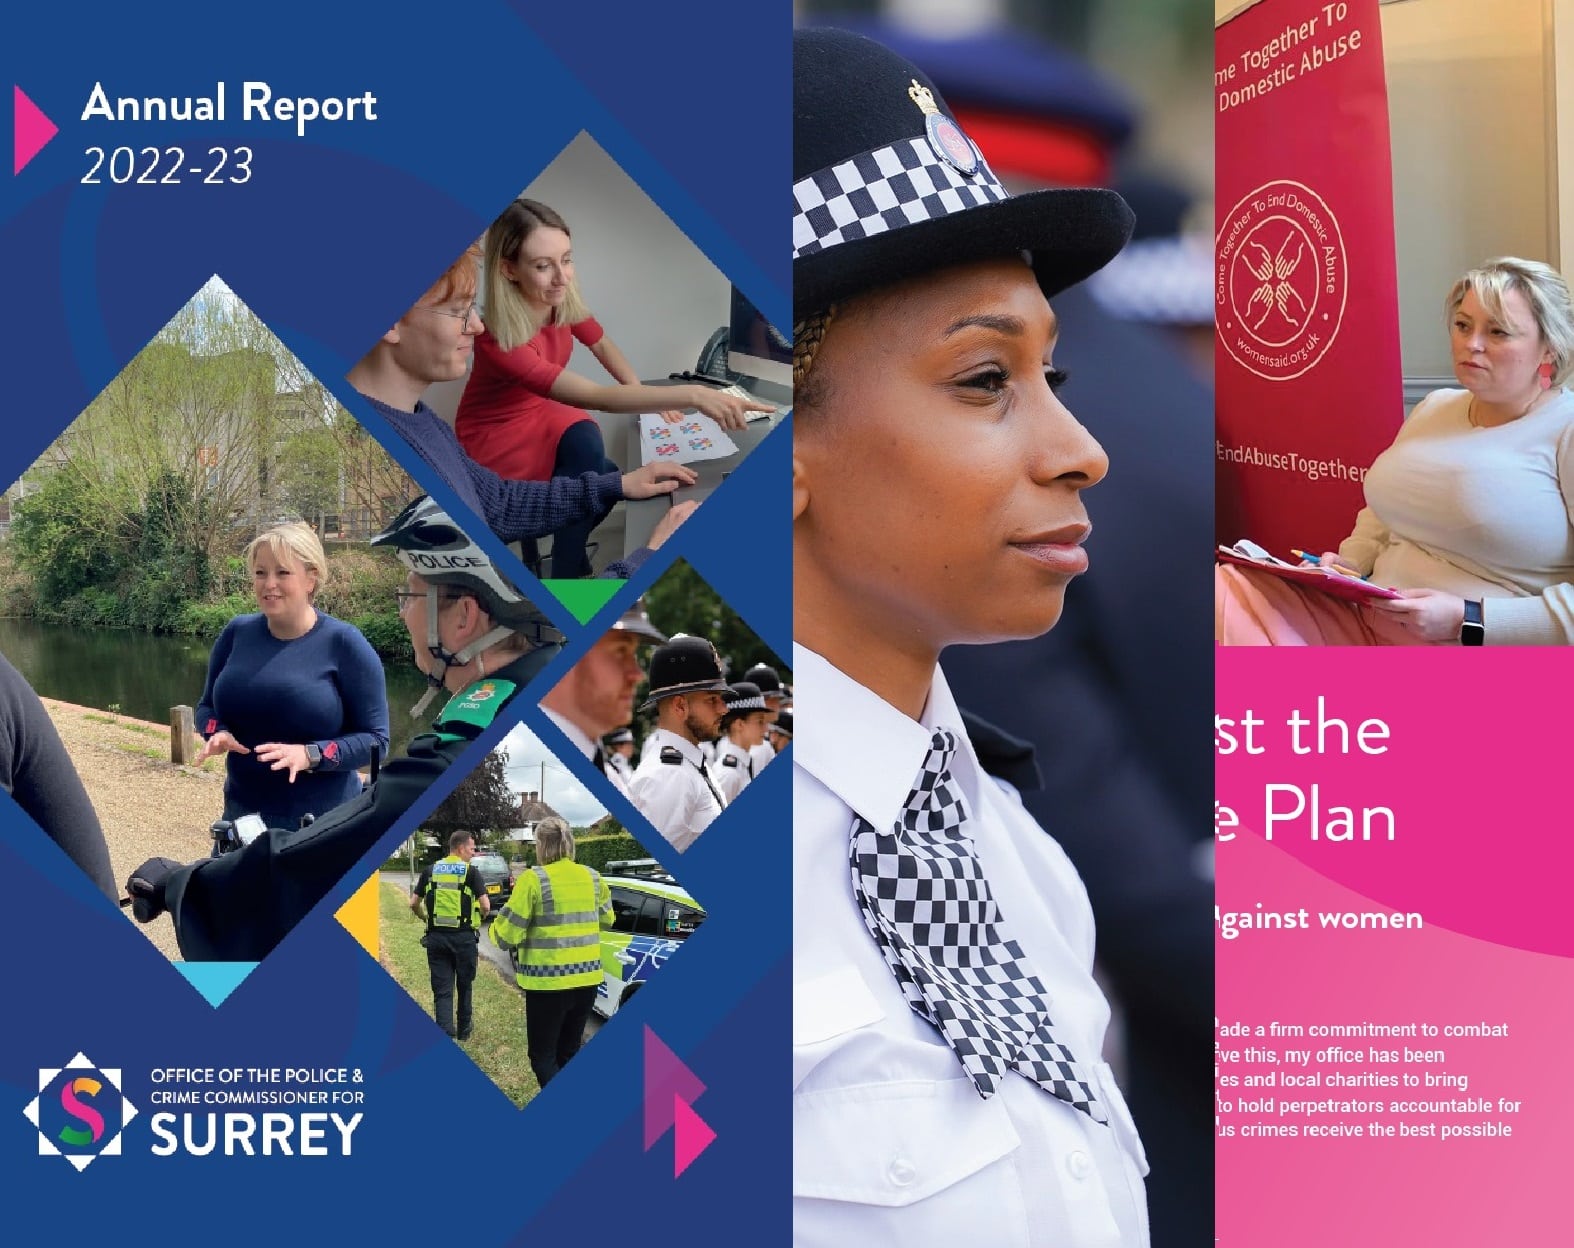 Front cover of the Office of the Police and Crime Commissioner's Annual Report with image of pages from the report placed behind